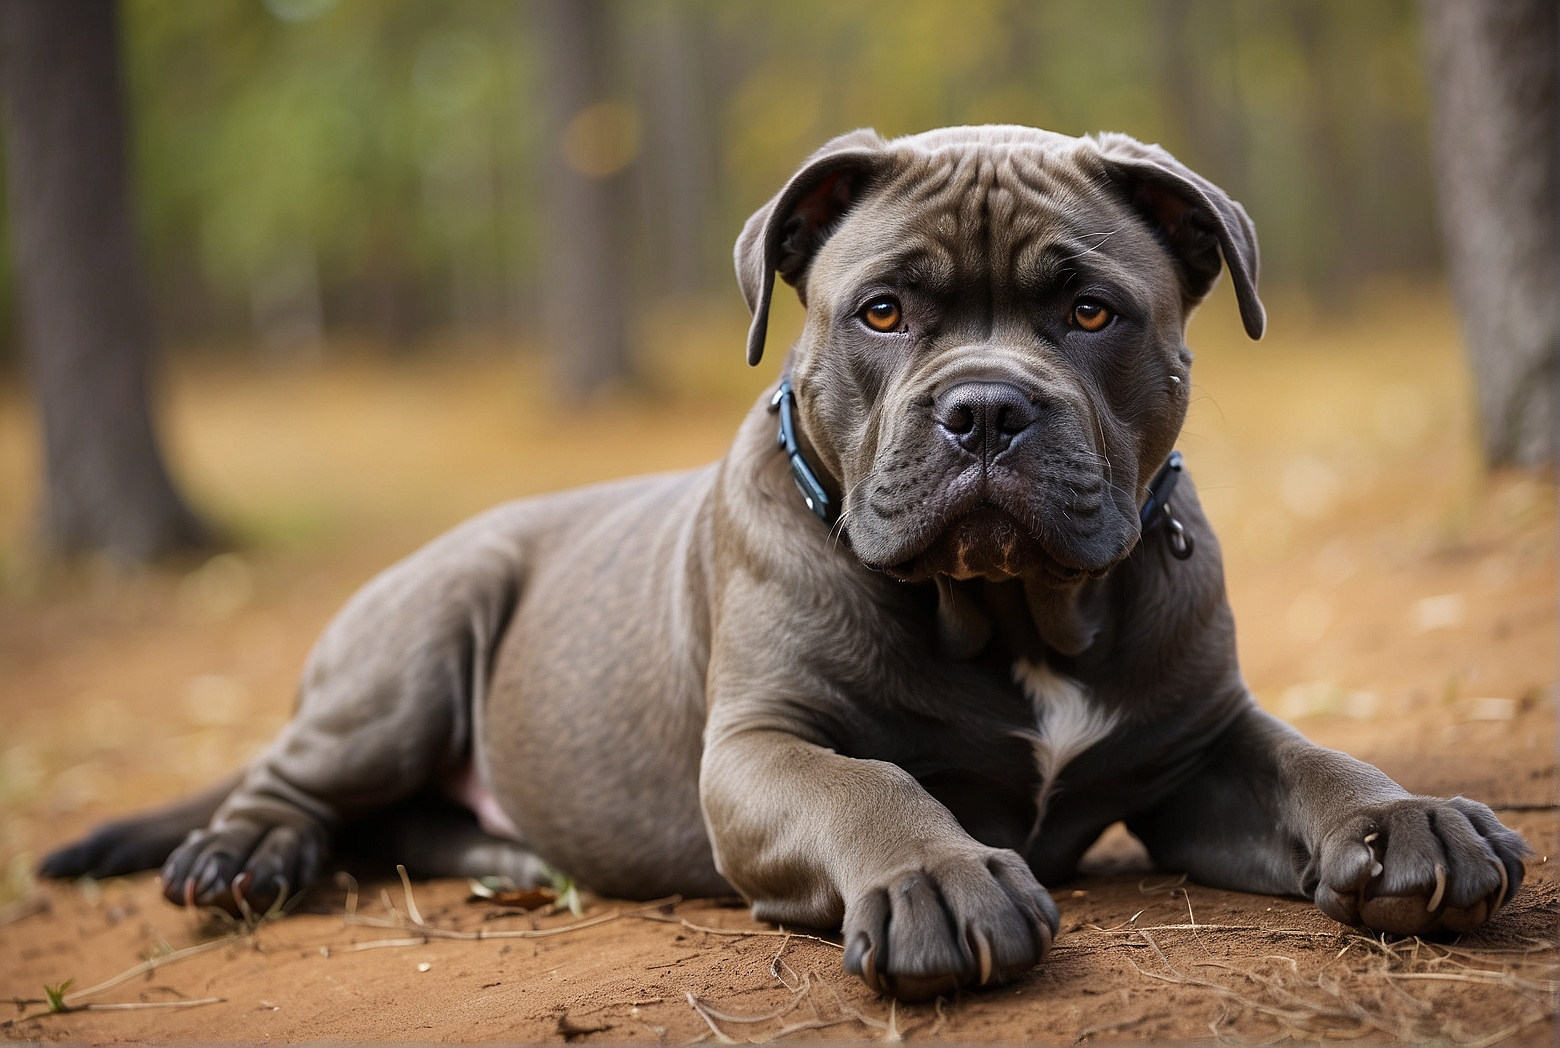 The Global Population of Cane Corso